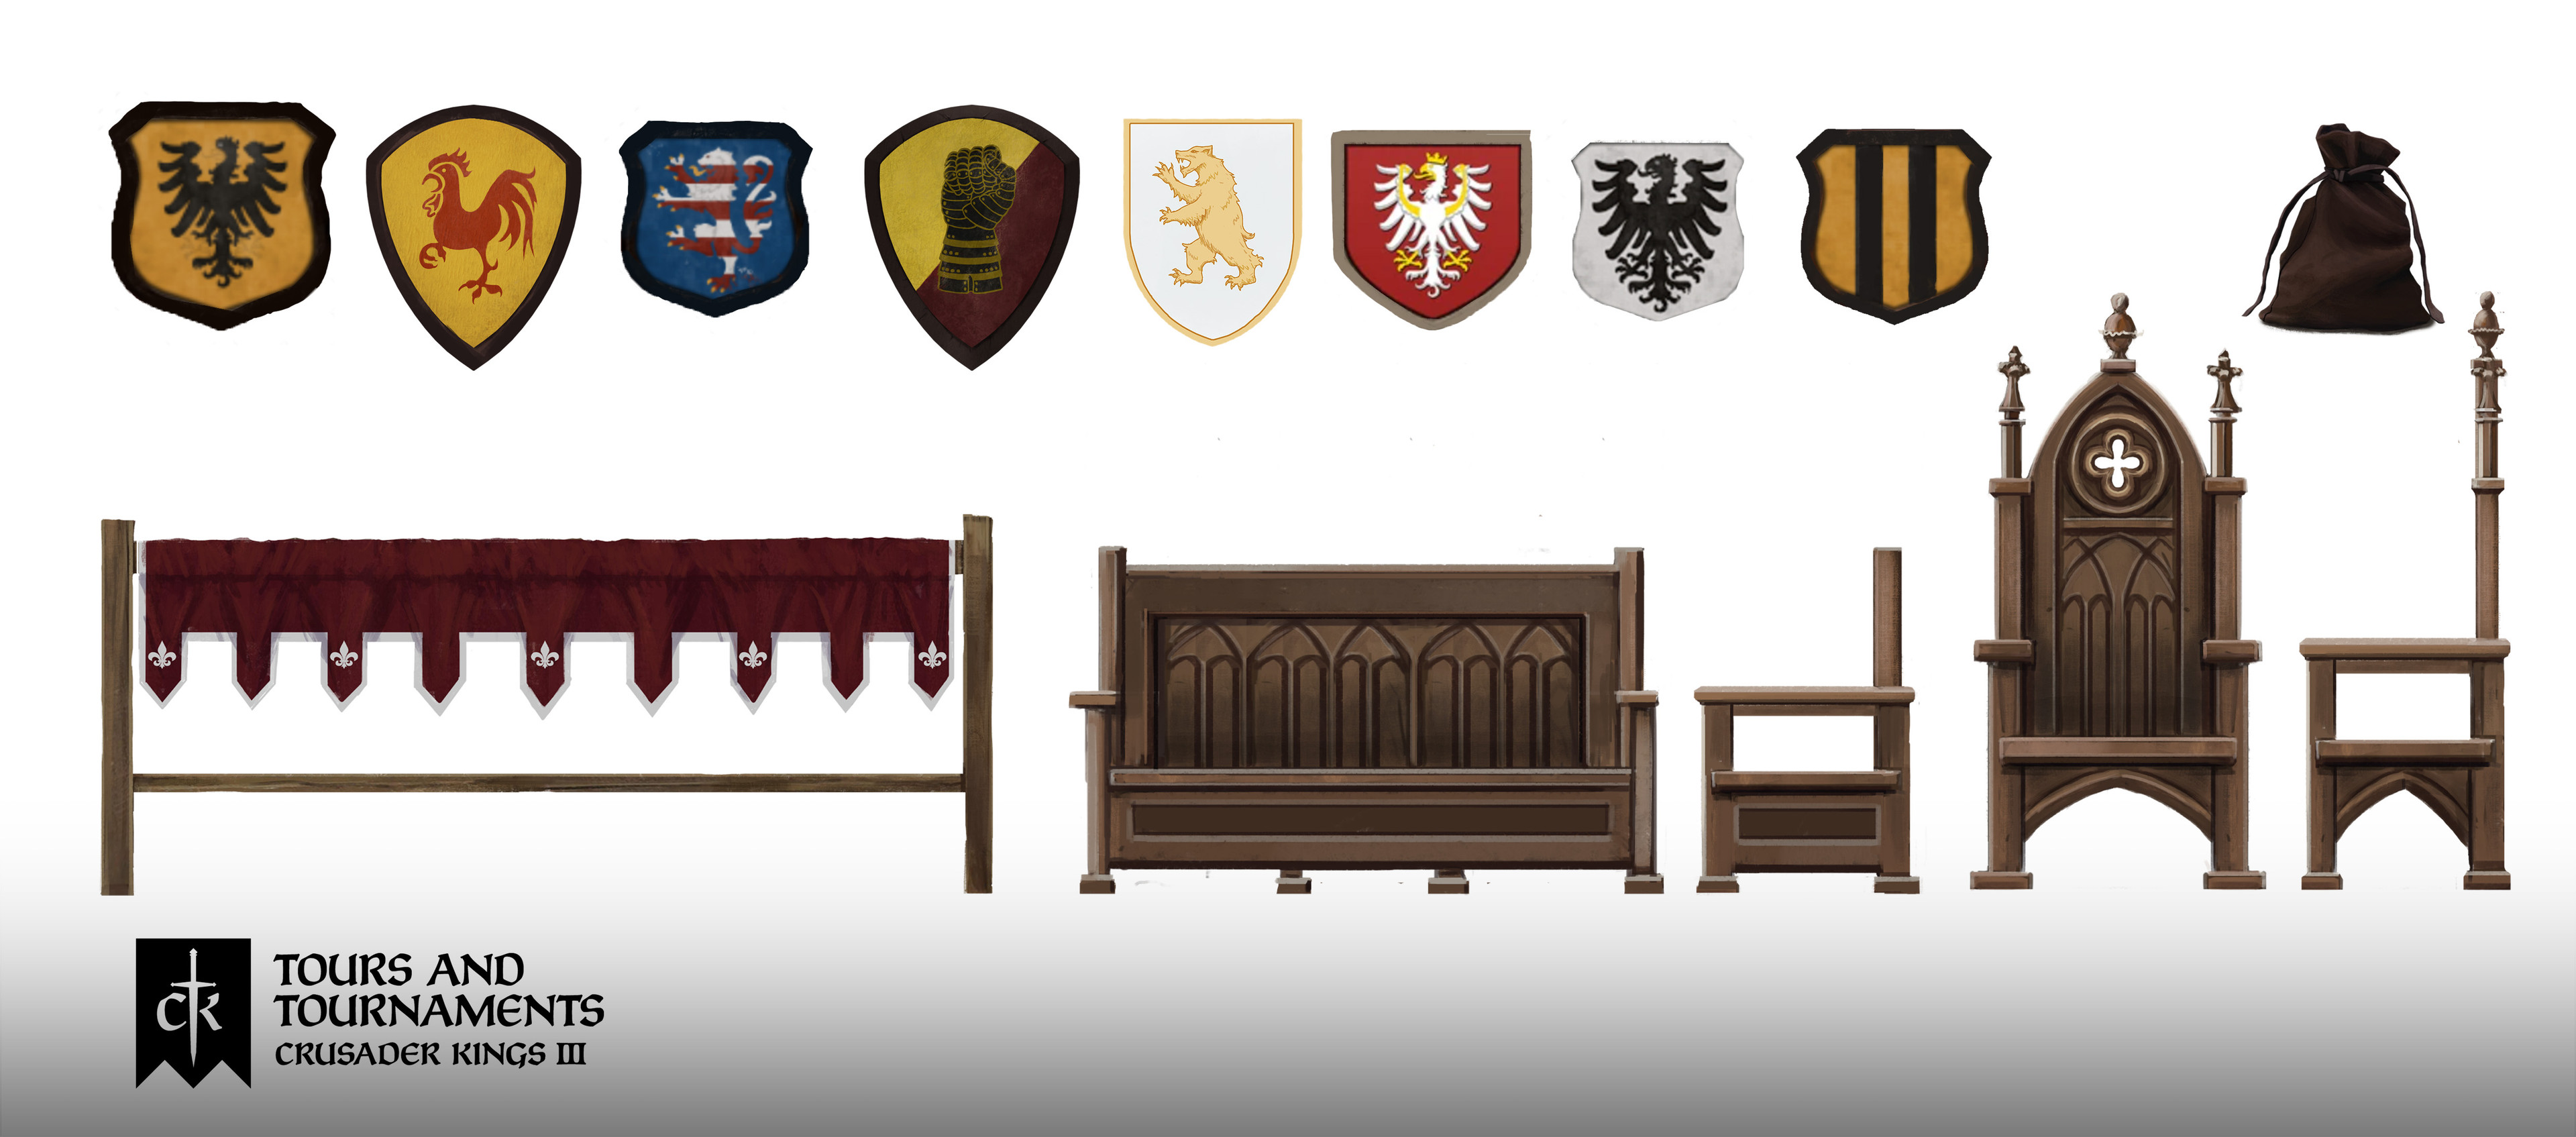 The middle railing, the thrones, the moneybag and shields not all shields are made by me. 